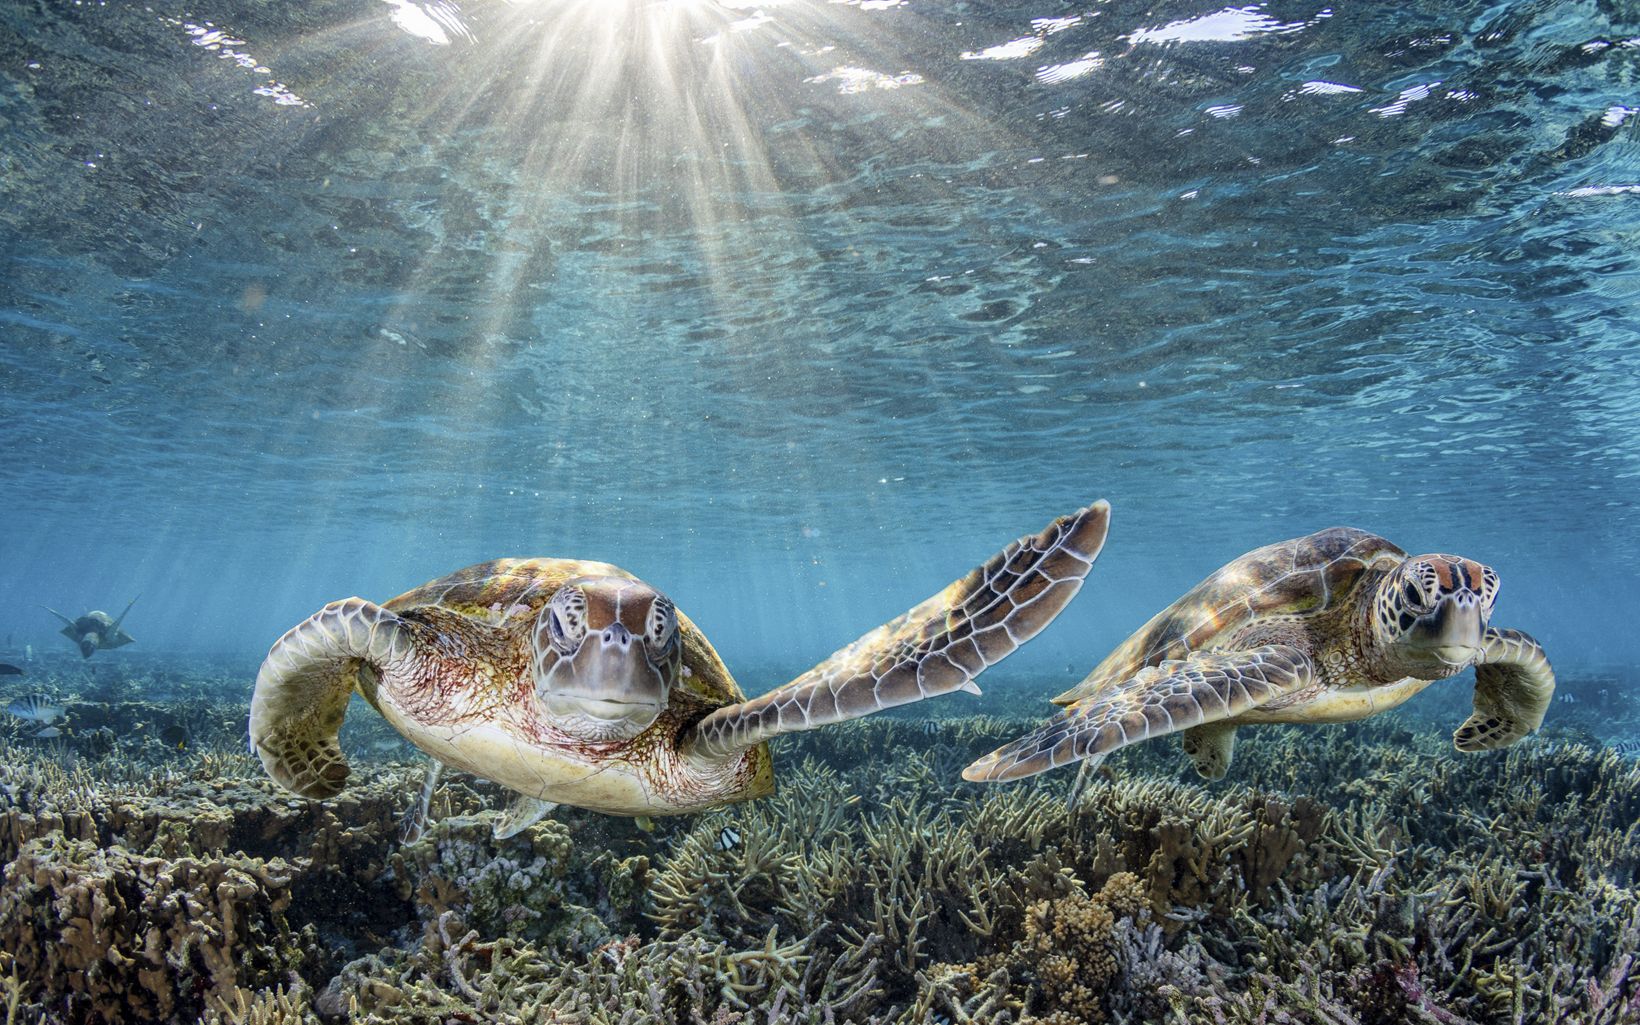 Two endangered Green Sea Turtles slapping some fins as they swim through the coral gardens on Lady Elliot Island.